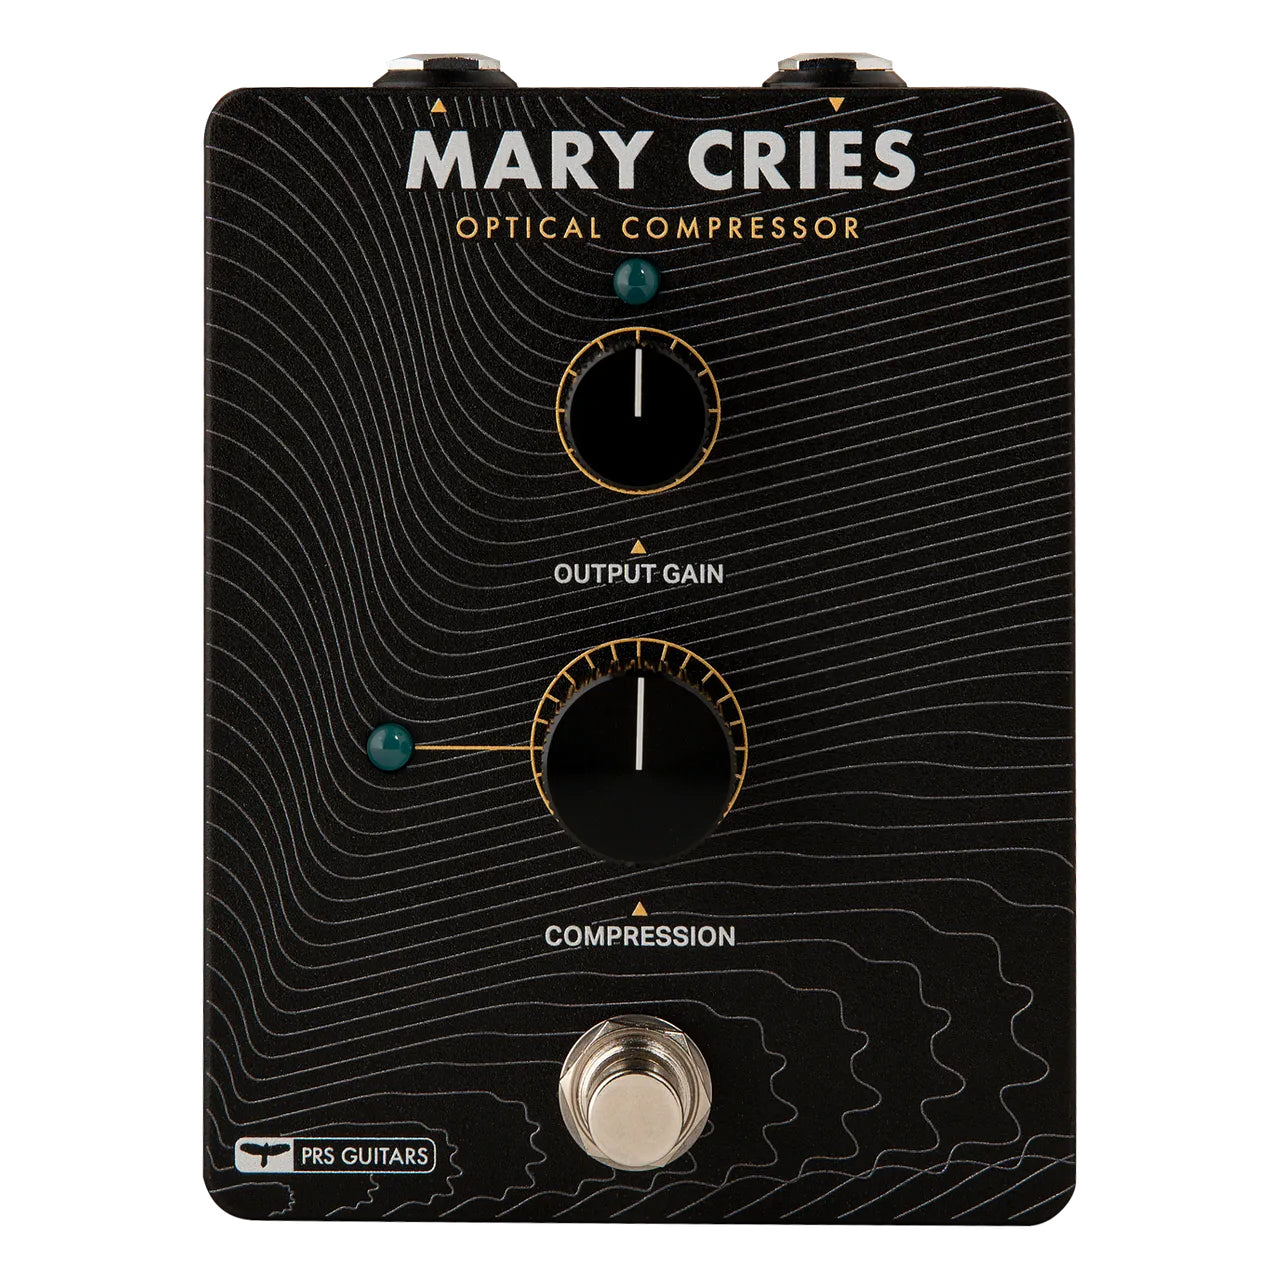 Paul Reed Smith Mary Cries Optical Compressor Effects Pedal